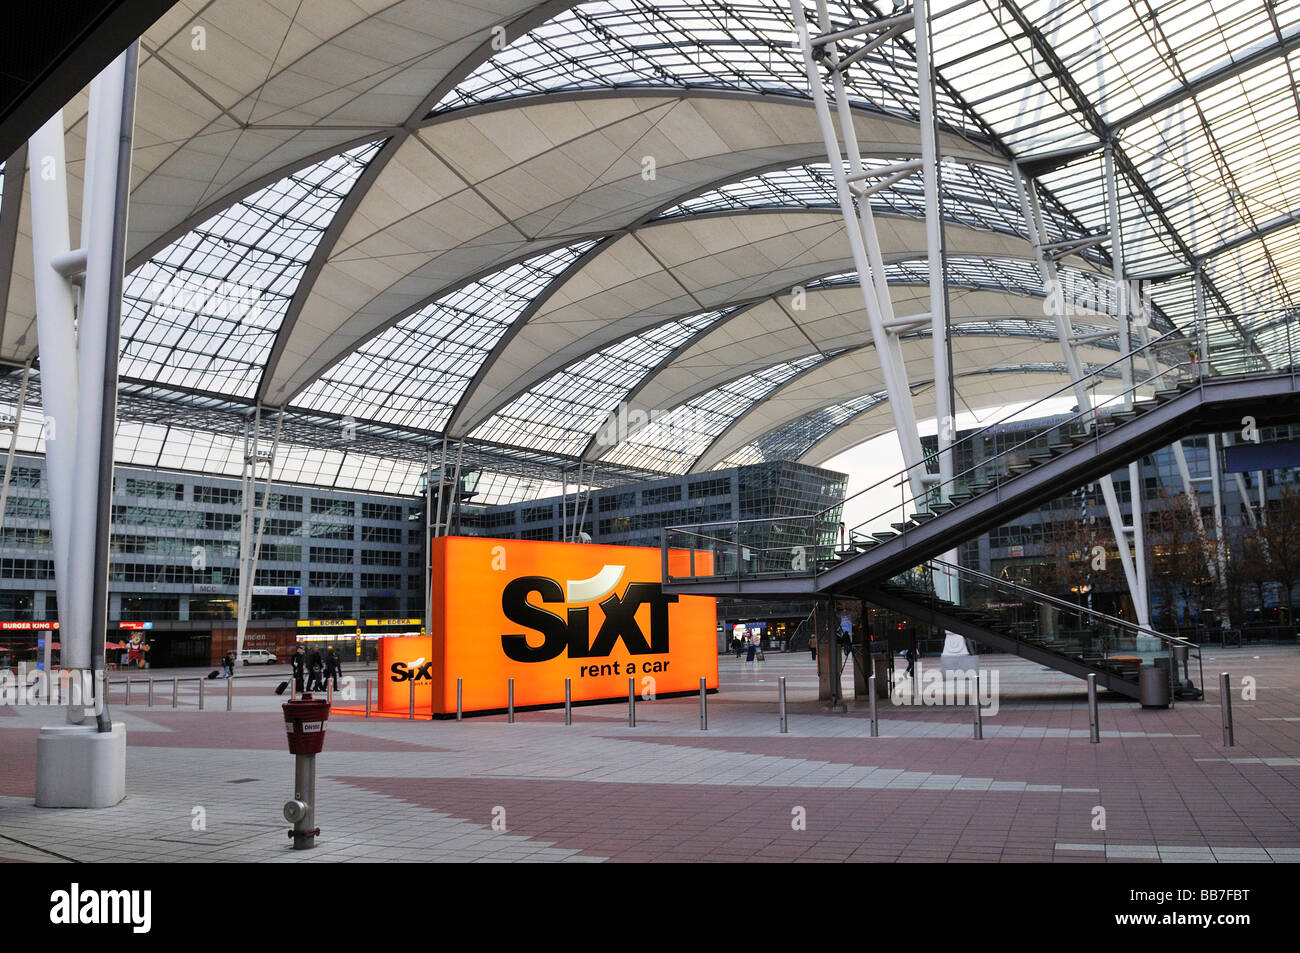 Ad for Sixt car rental service, Terminal 2, MUC II Airport, Munich,  Bavaria, Germany, Europe Stock Photo - Alamy